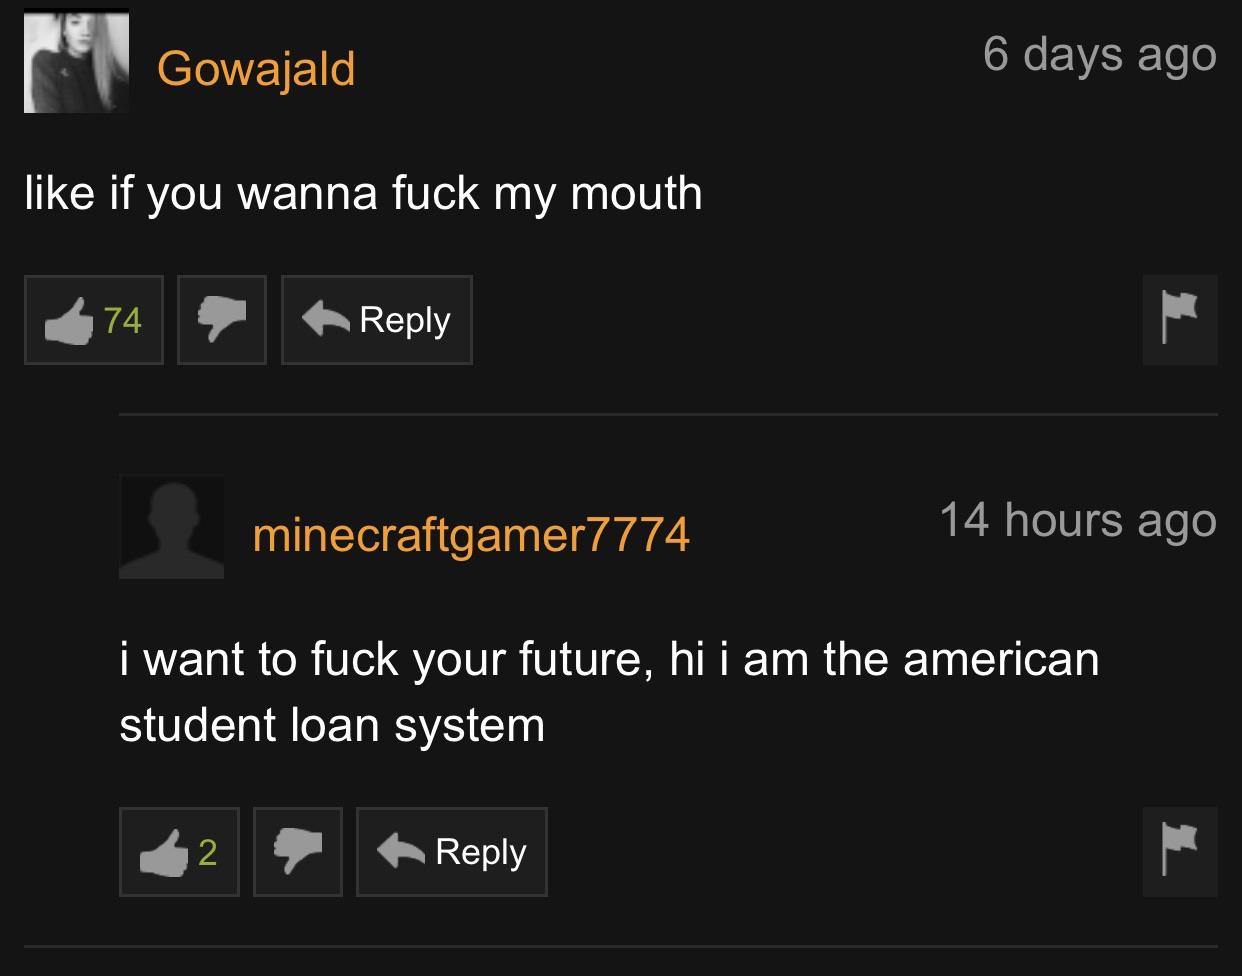 pornhub - screenshot - Gowajald 6 days ago if you wanna fuck my mouth minecraftgamer7774 14 hours ago i want to fuck your future, hi i am the american student loan system